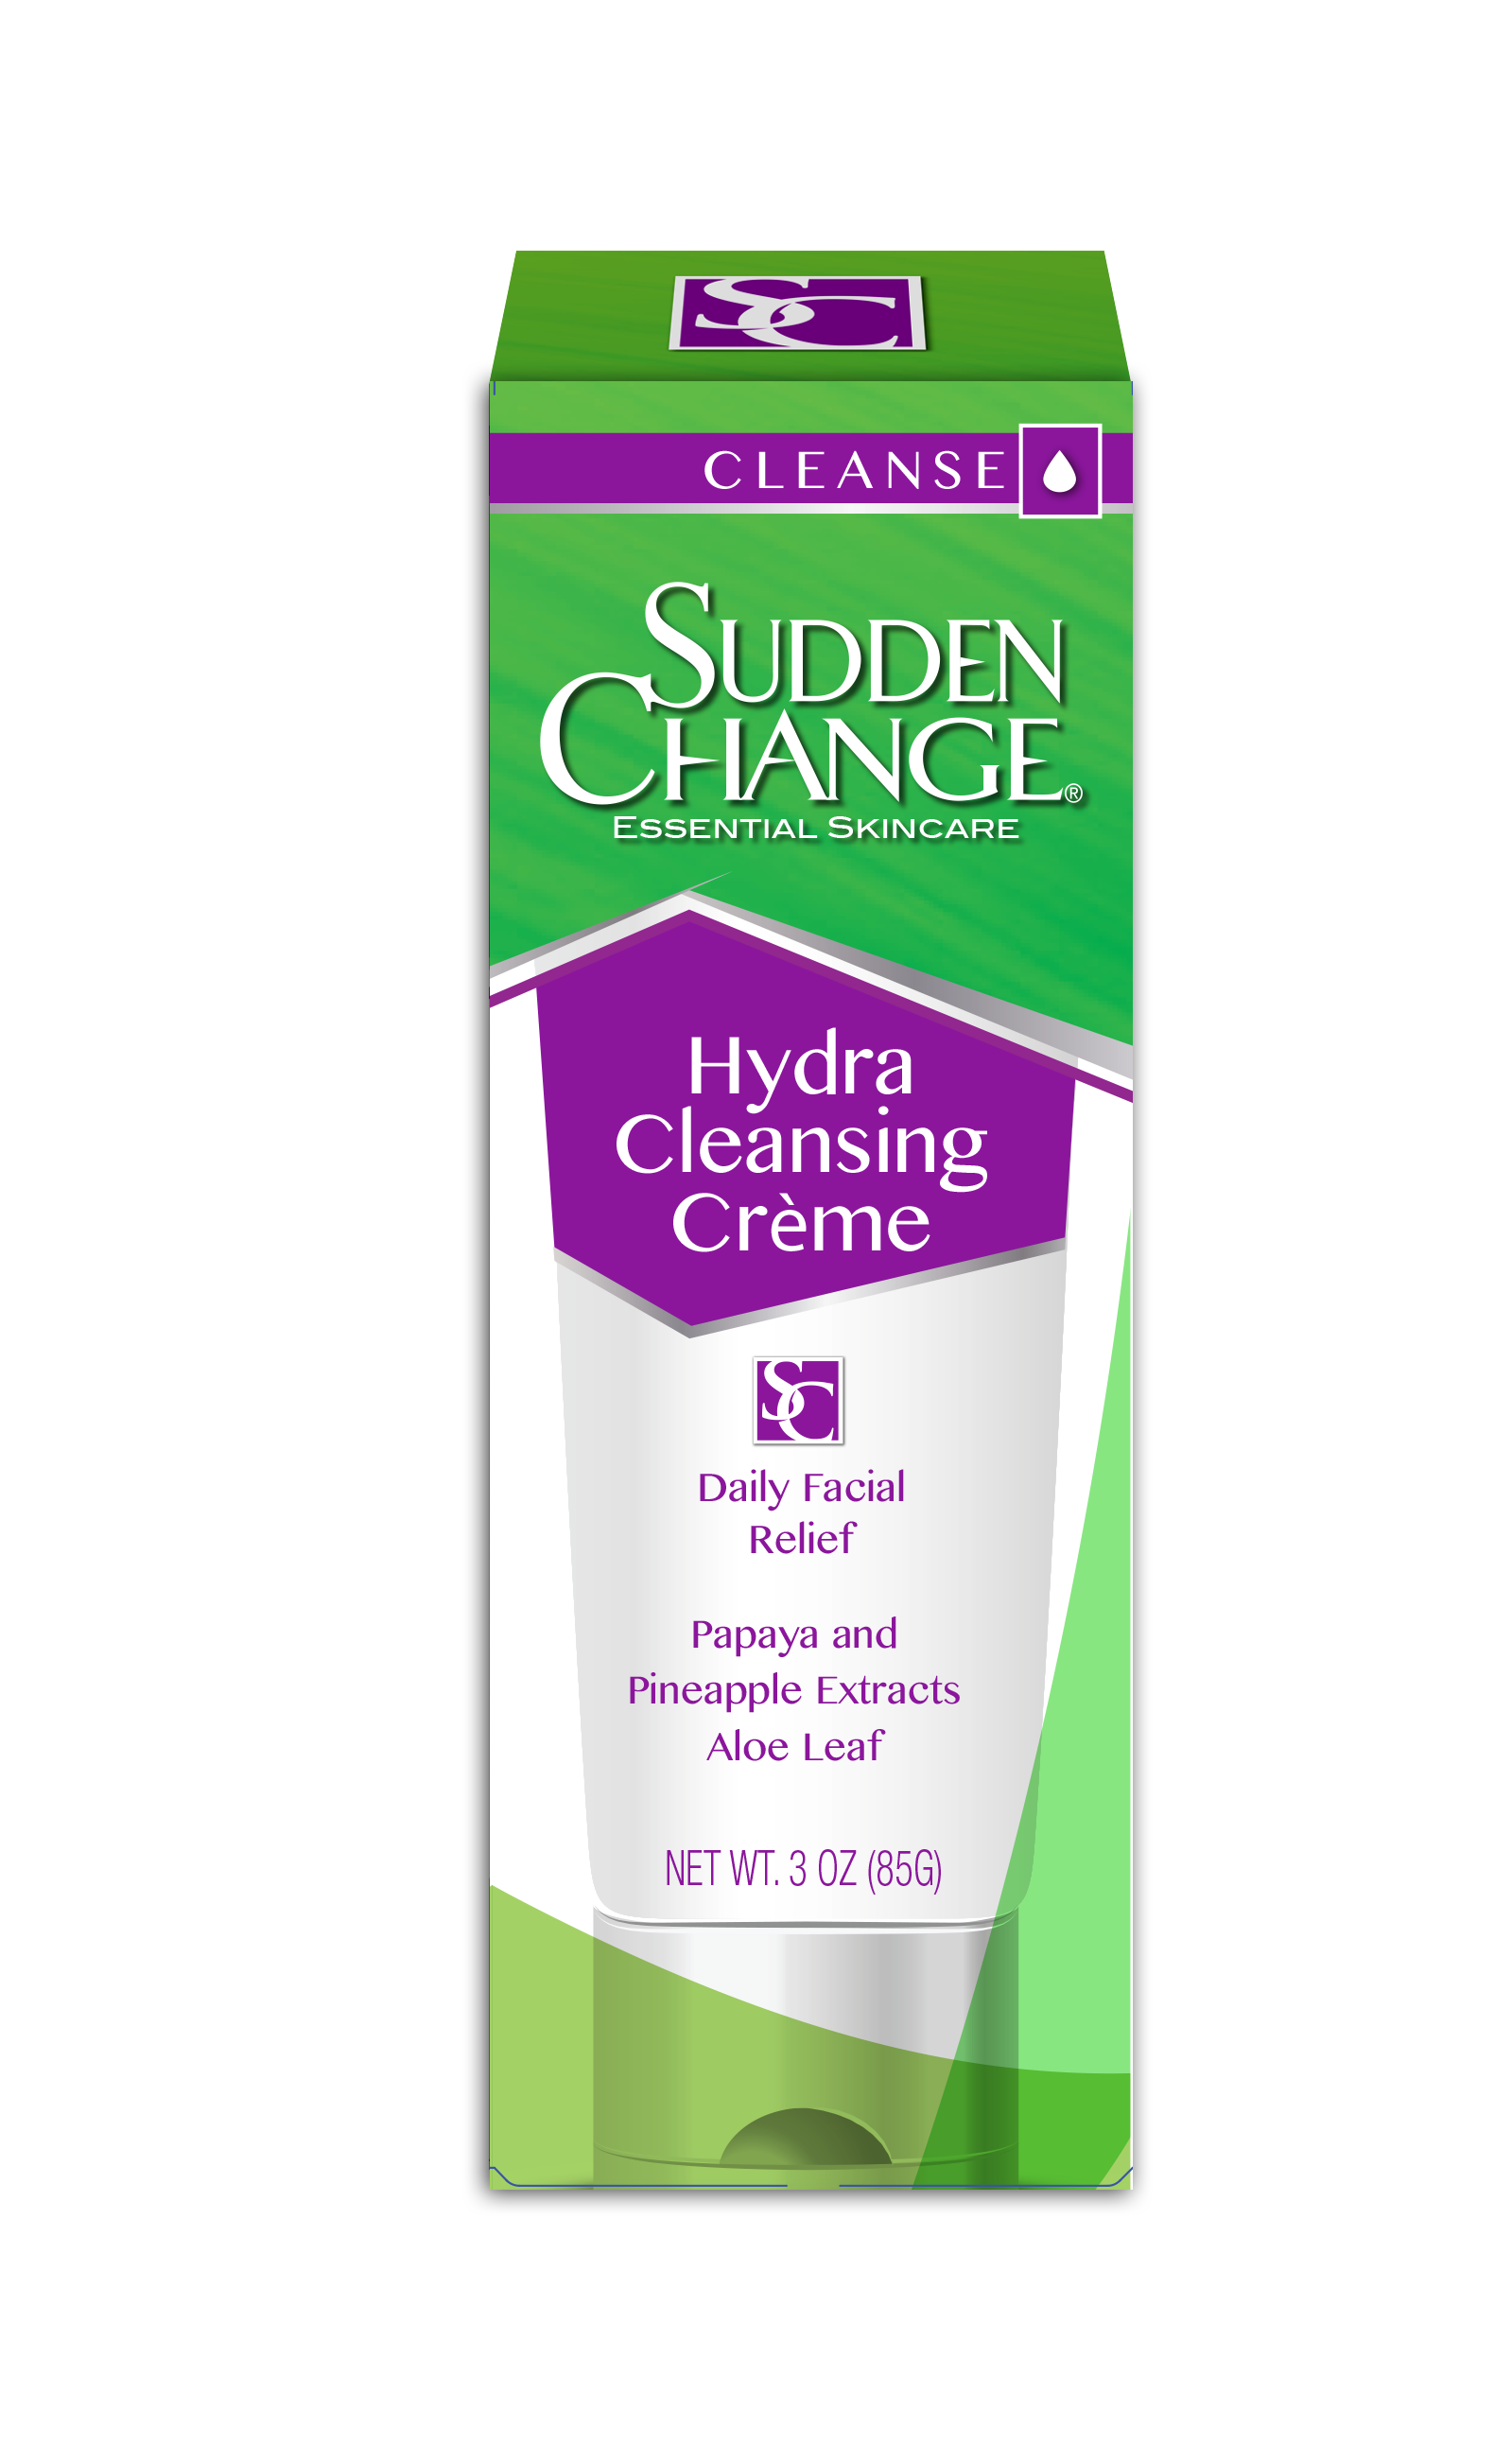 Sudden Change Hydra Cleansing Crème